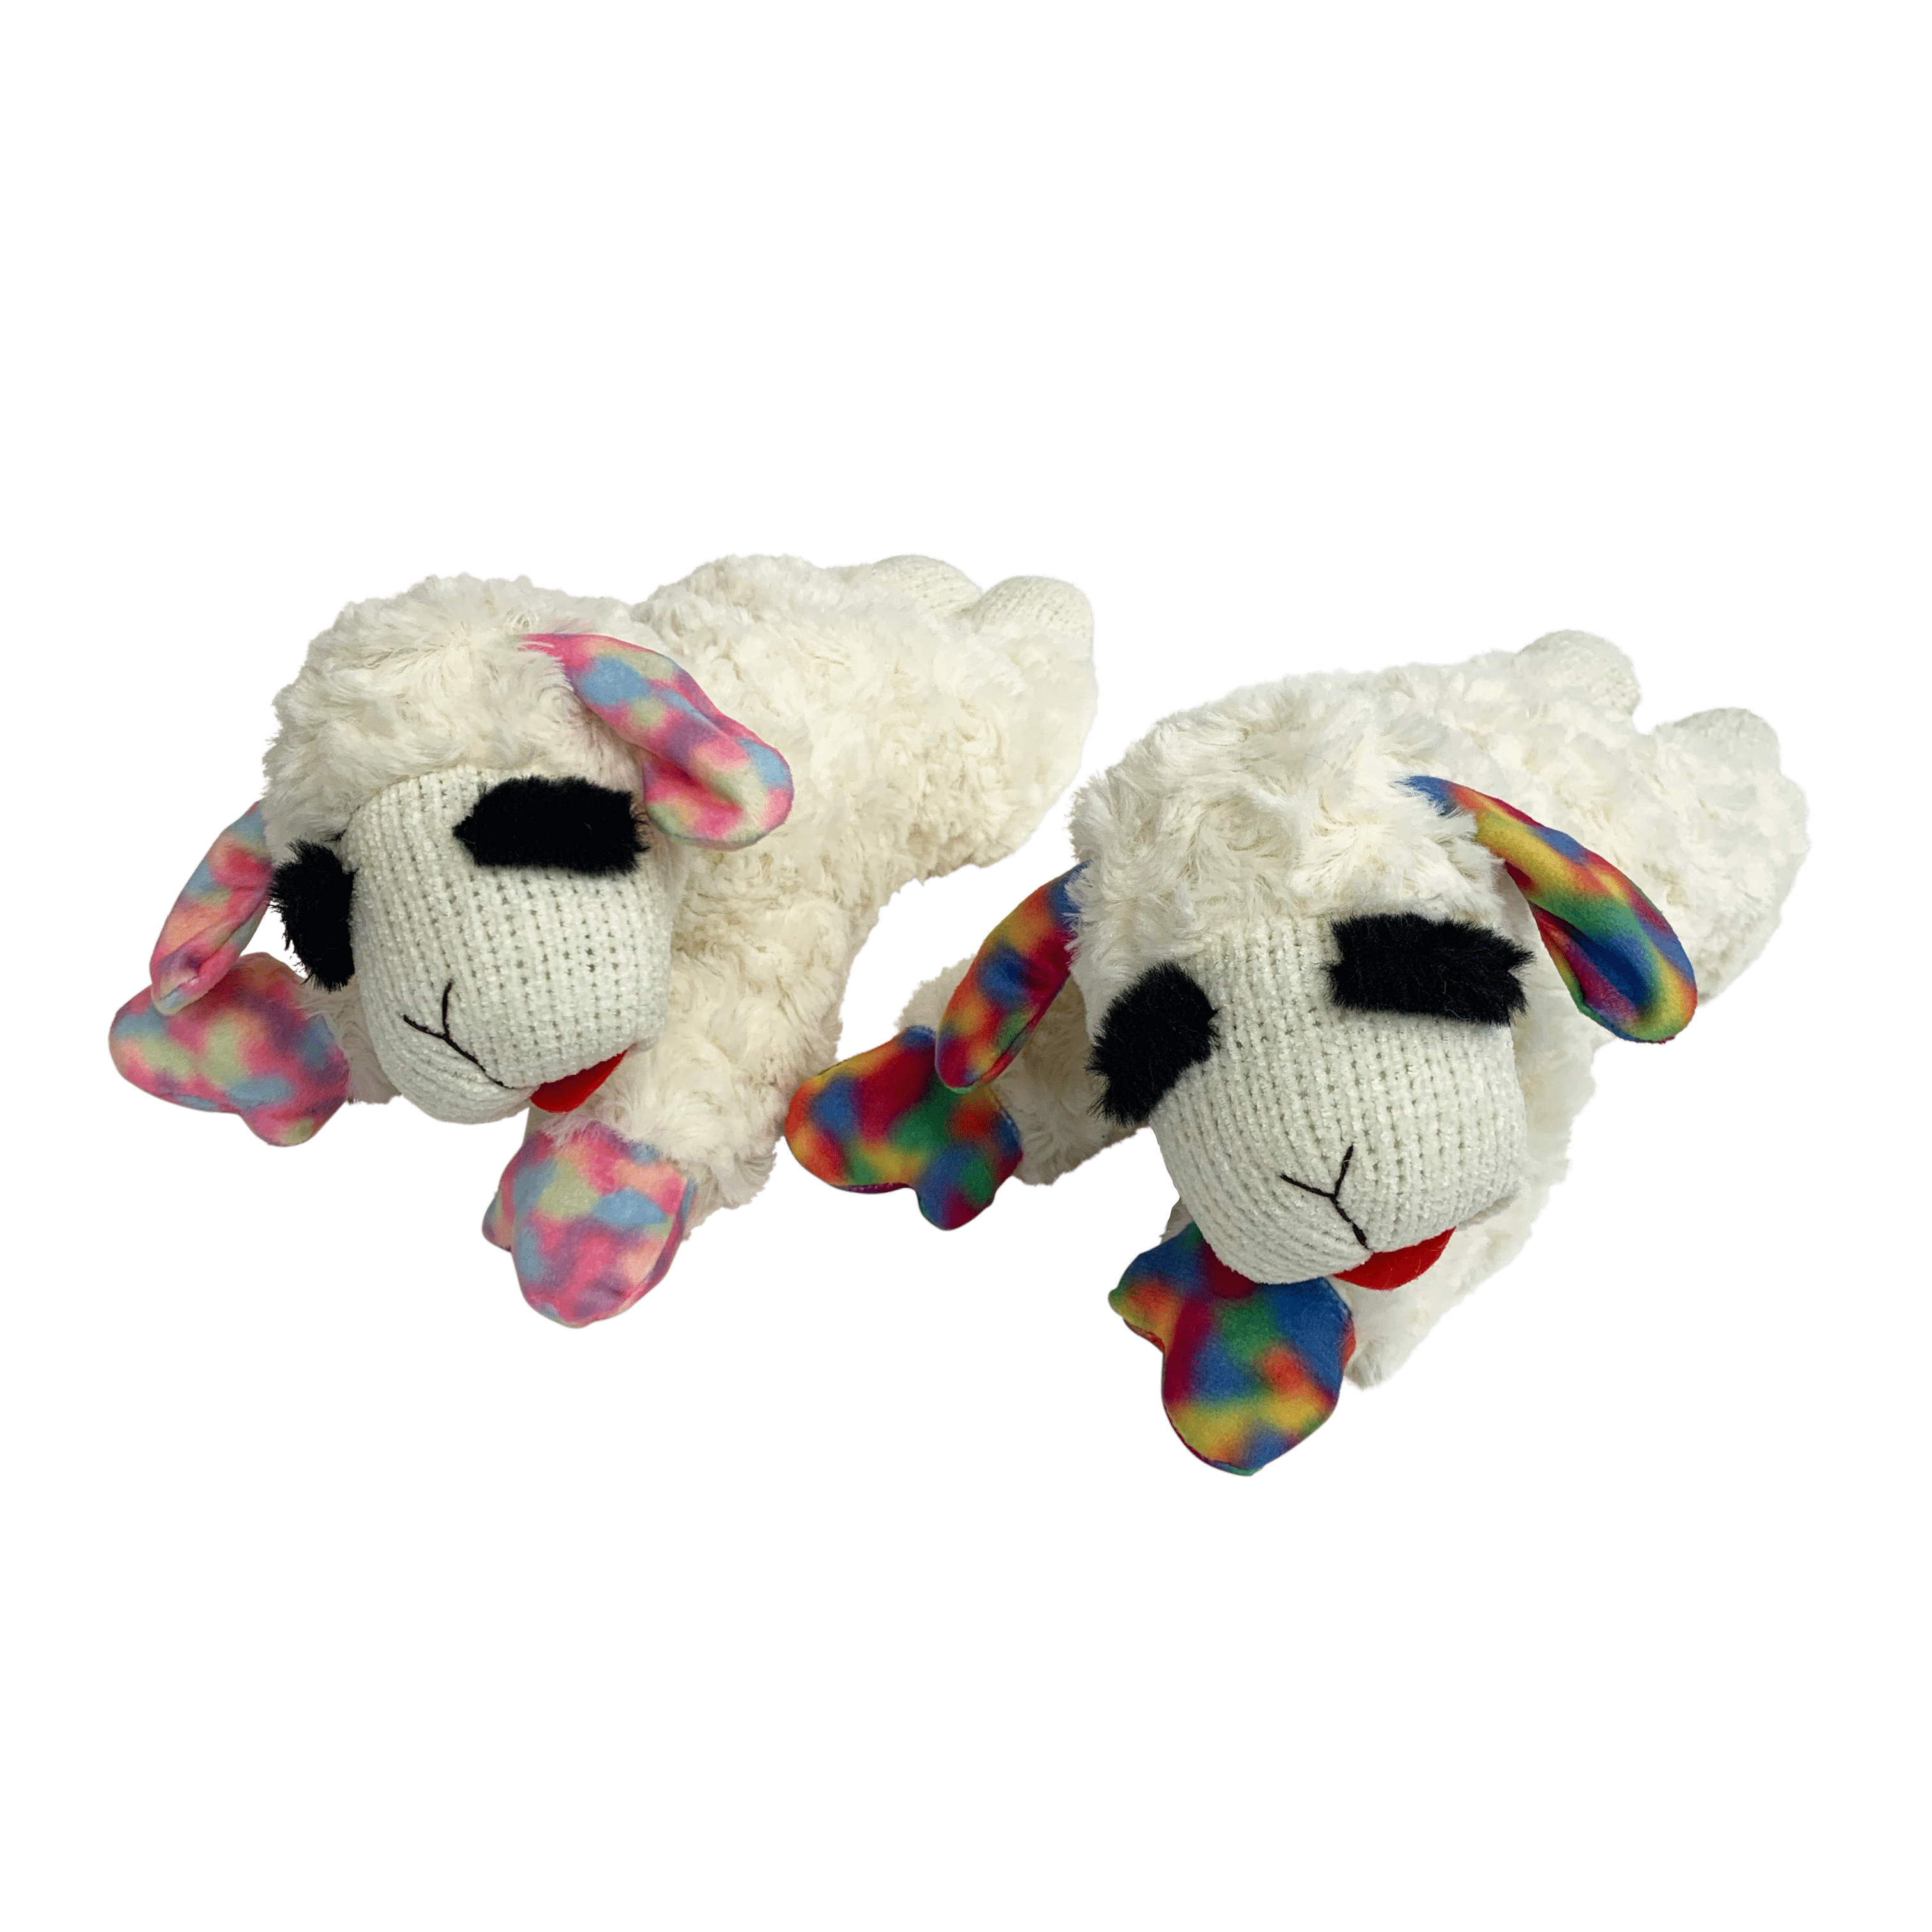 Multipet Lambchop Plush Dog Toy 10 with Squeaker 